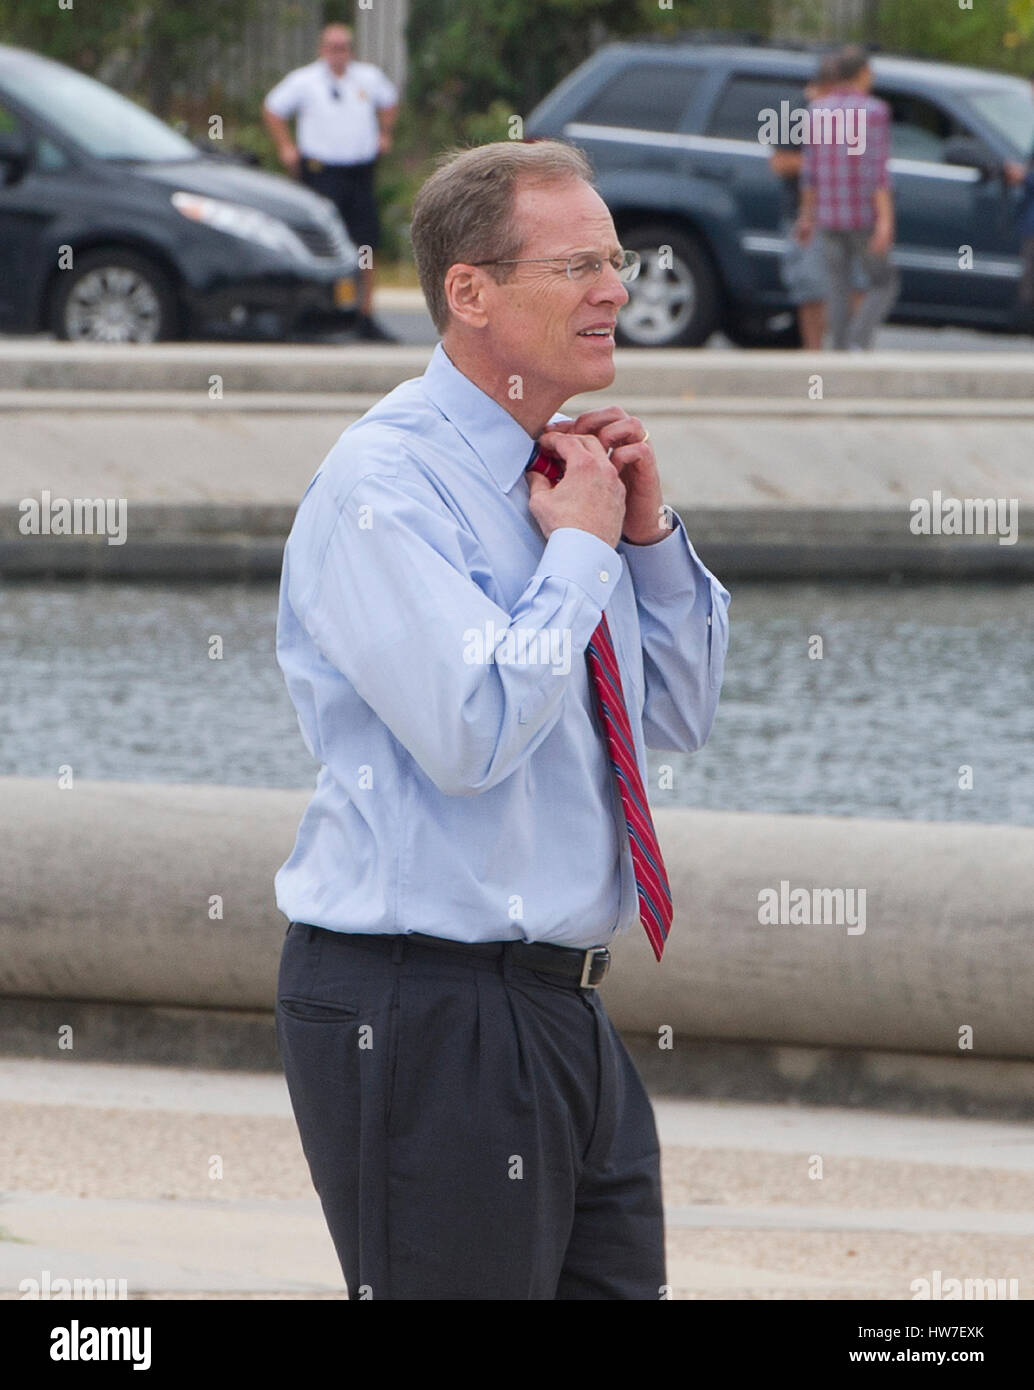 United States Representative Jack Kingston (Democrat of Georgia) loosens his tie as he prepares to work on bit with Stephen Colbert host of the Comedy Central show 'The Colbert Report' around the the U.S. Capitol Reflecting Pool in Washington D.C. on Frid Stock Photo